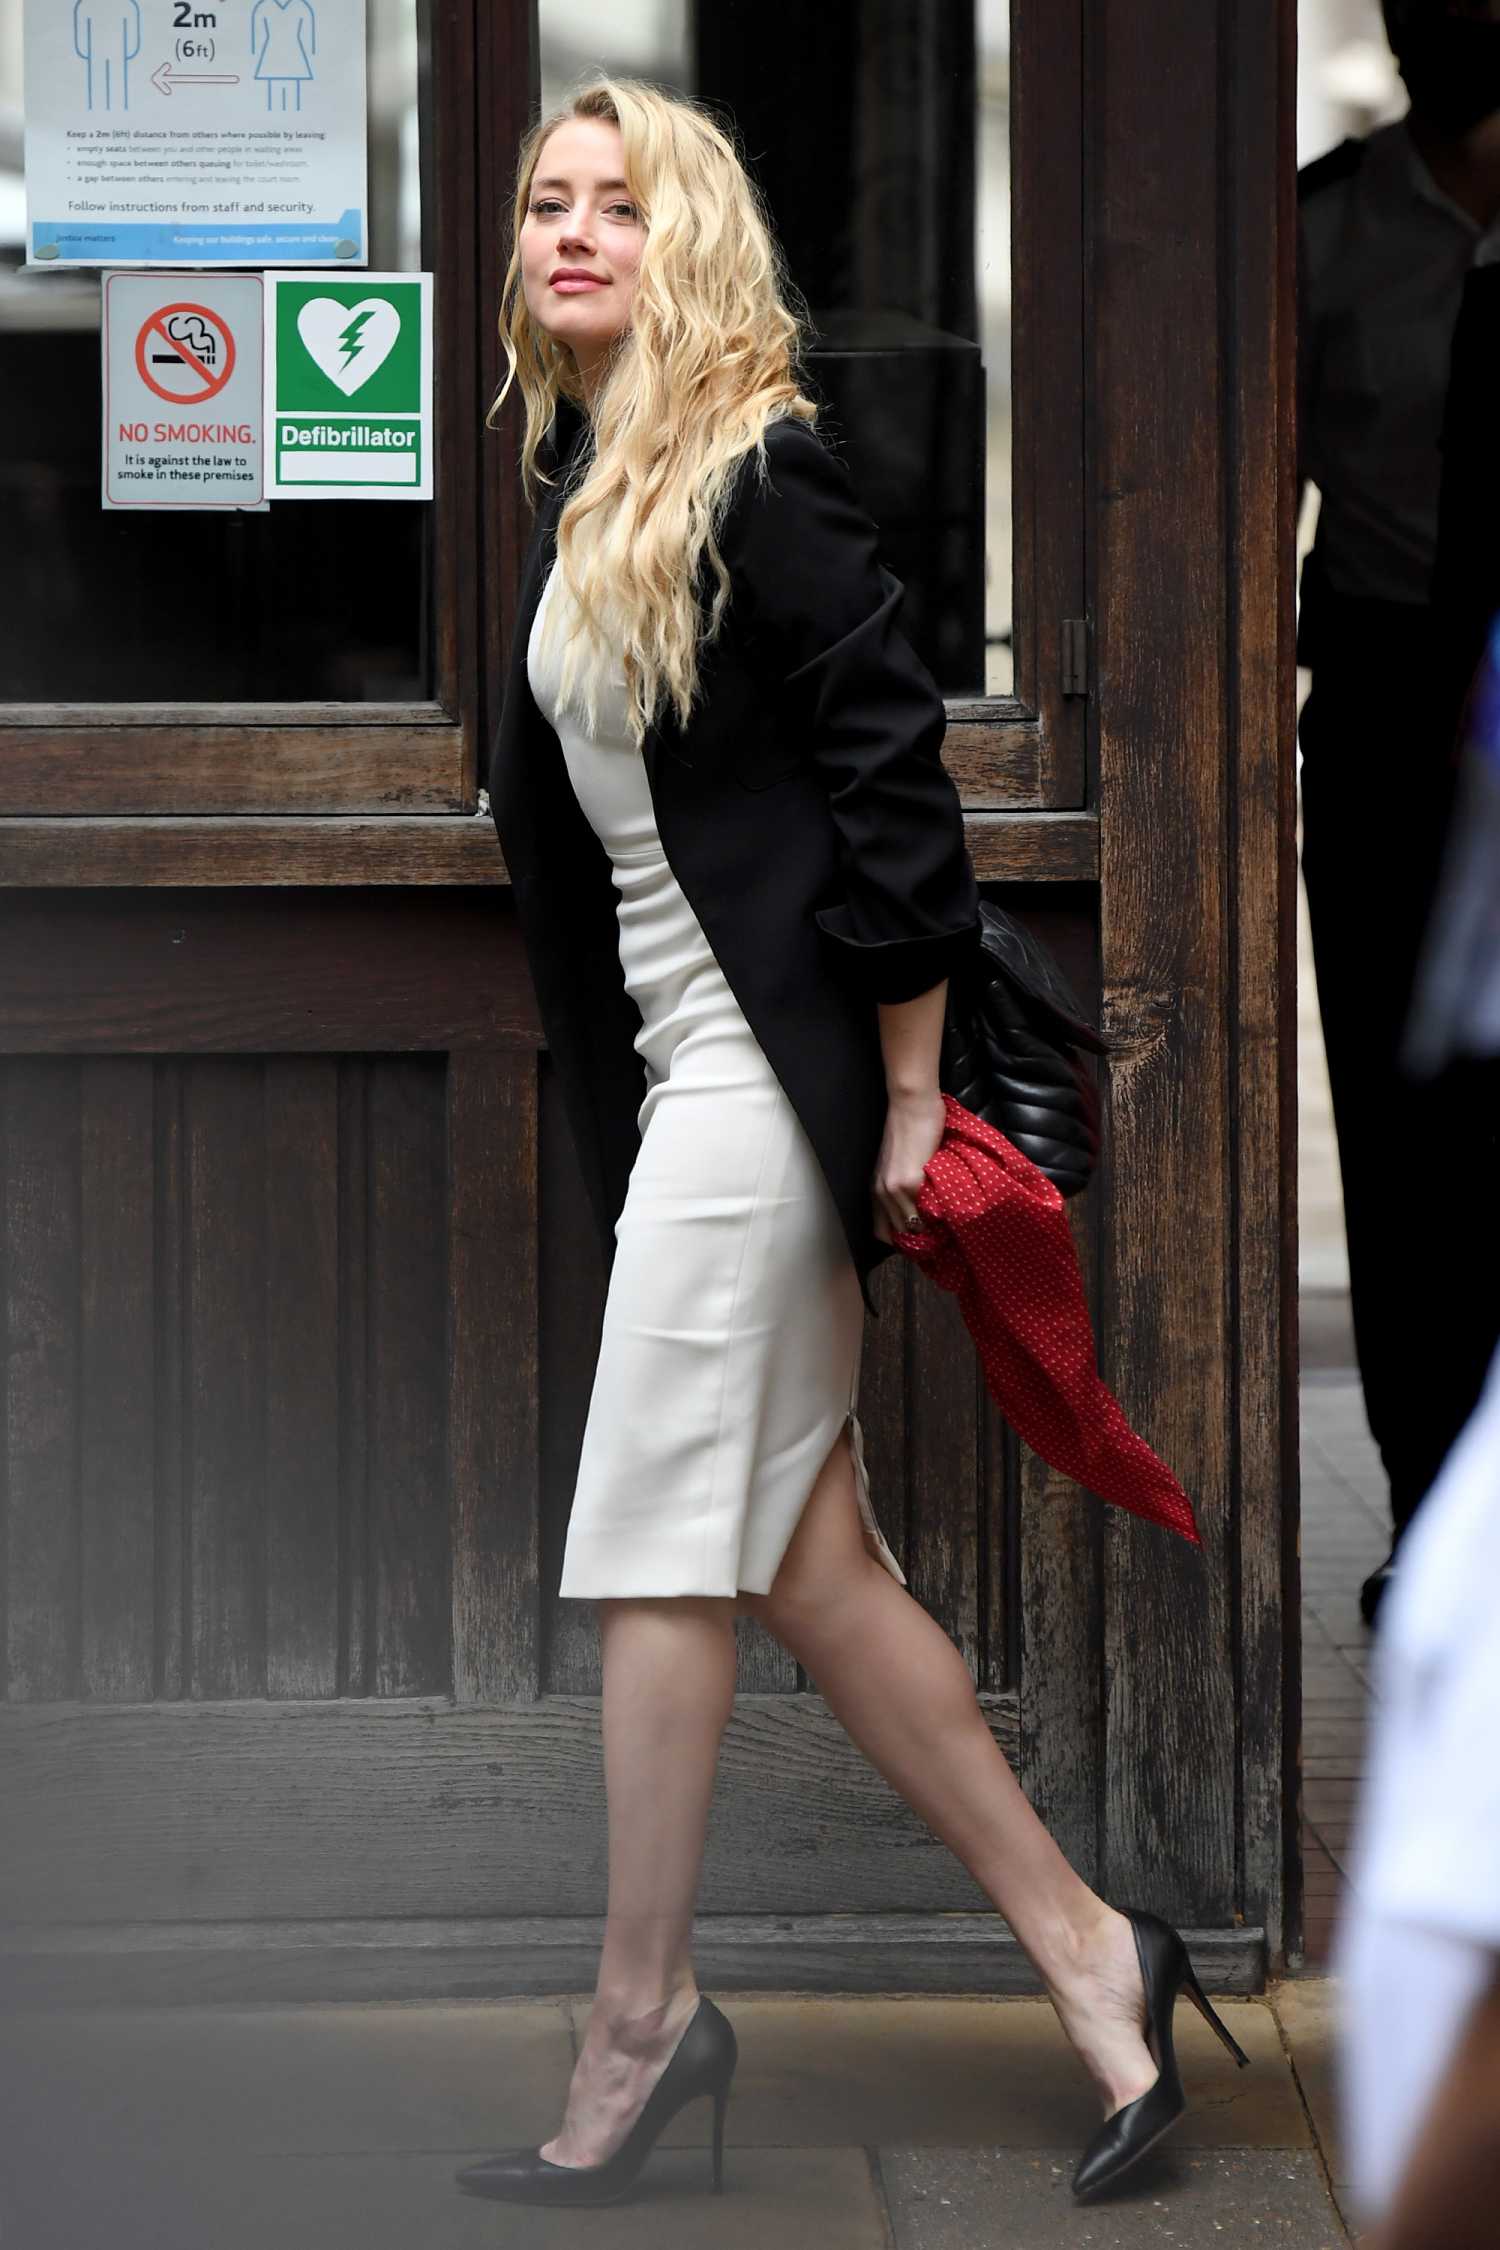 Amber Heard in a White Dress Arrives at the Royal Courts of Justice in